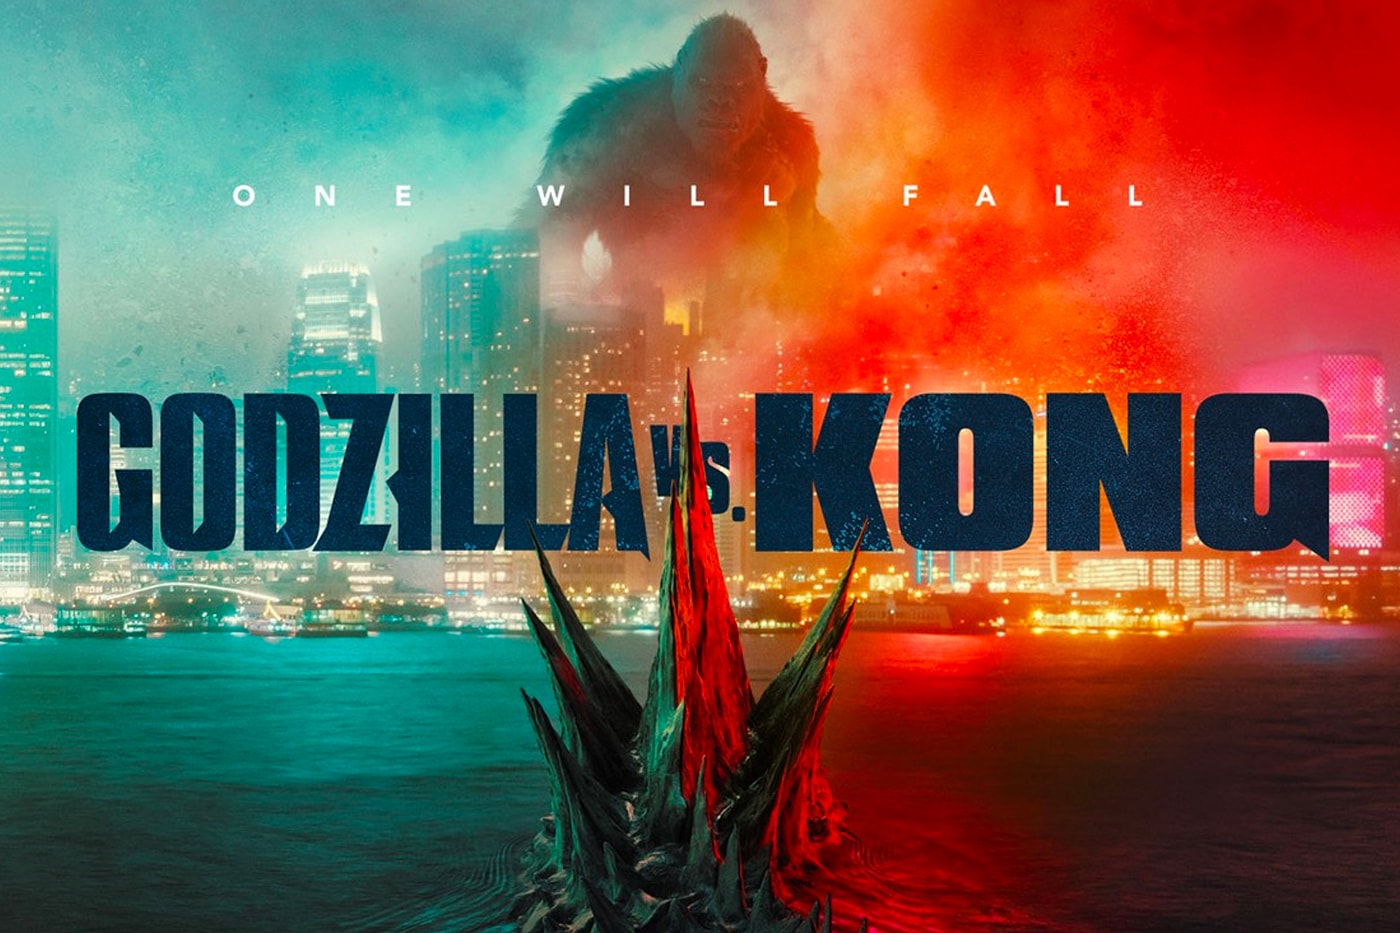 'Godzilla vs. Kong' New Trailer Revealed Twitter Kaiju Nathan Lind Legendary Pictures Hong Kong Titans Monsters Warner Bros Alexander Skarsgard, Millie Bobby Brown, Rebecca Hall and Brian Tyree Henry Adam Wingard Eric Pearson HBO Max